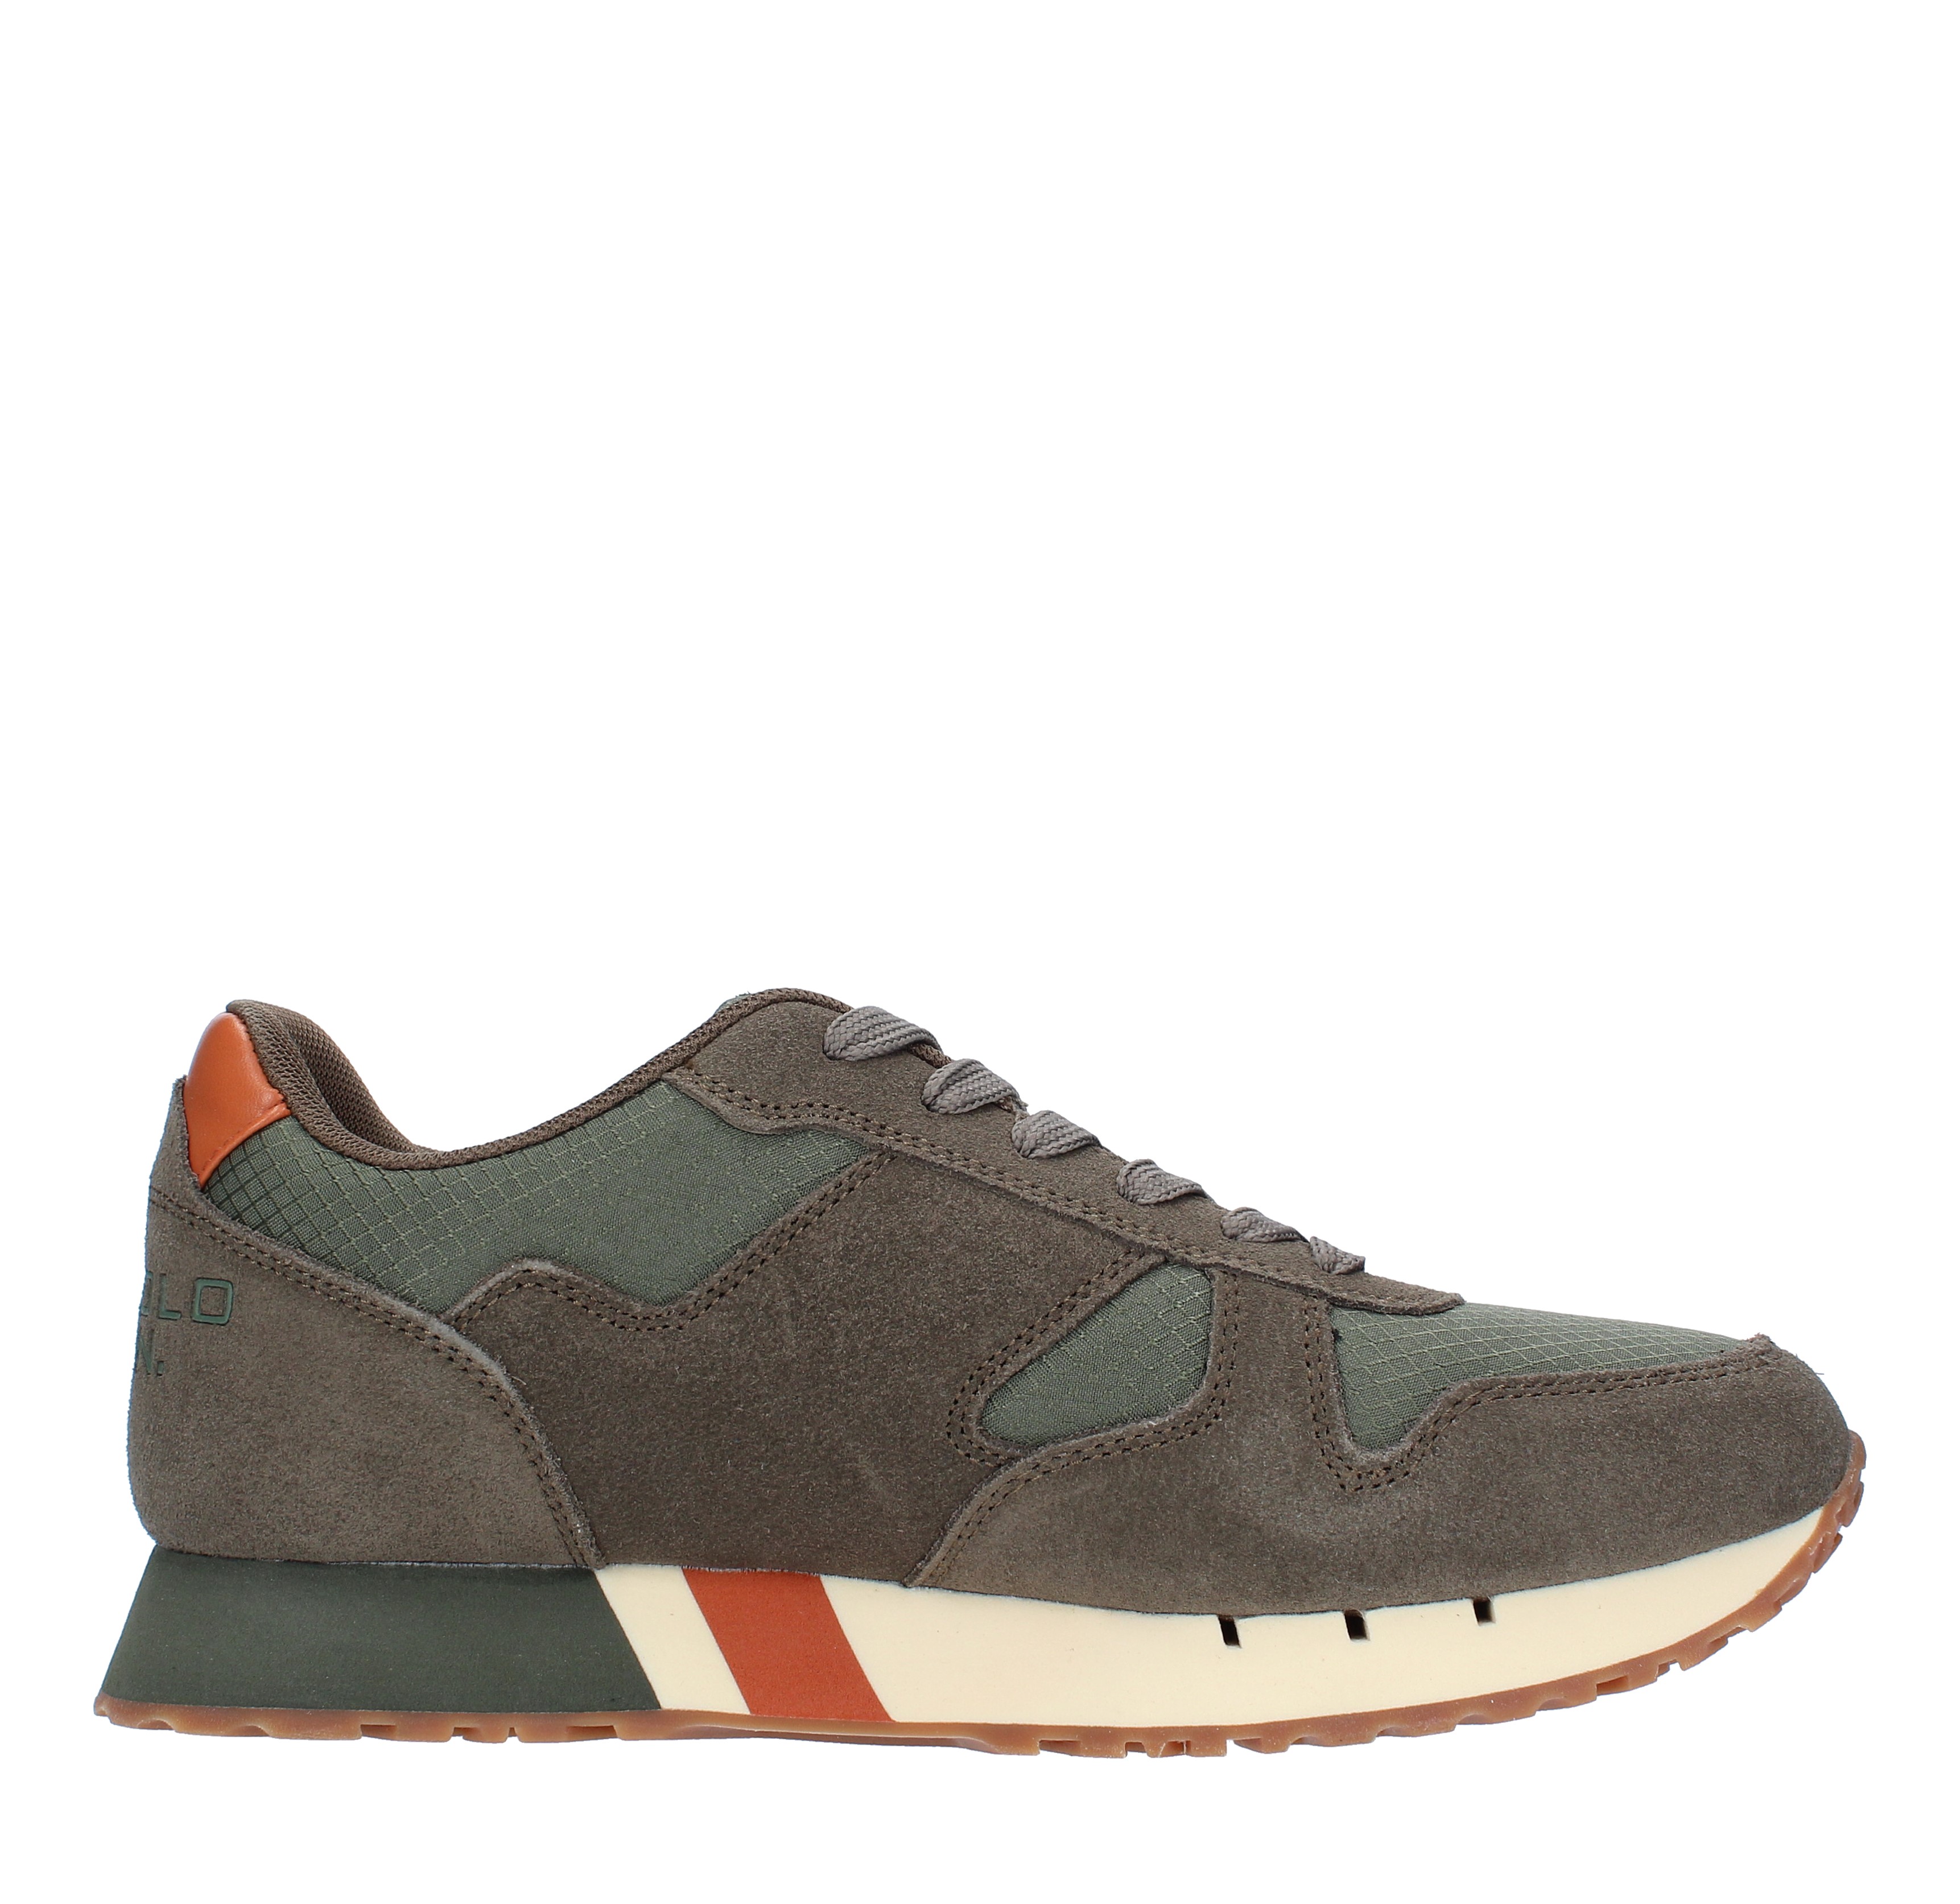 Suede and fabric trainers U.S. POLO ASSN. | BLOW4052W0/SN1VERDE